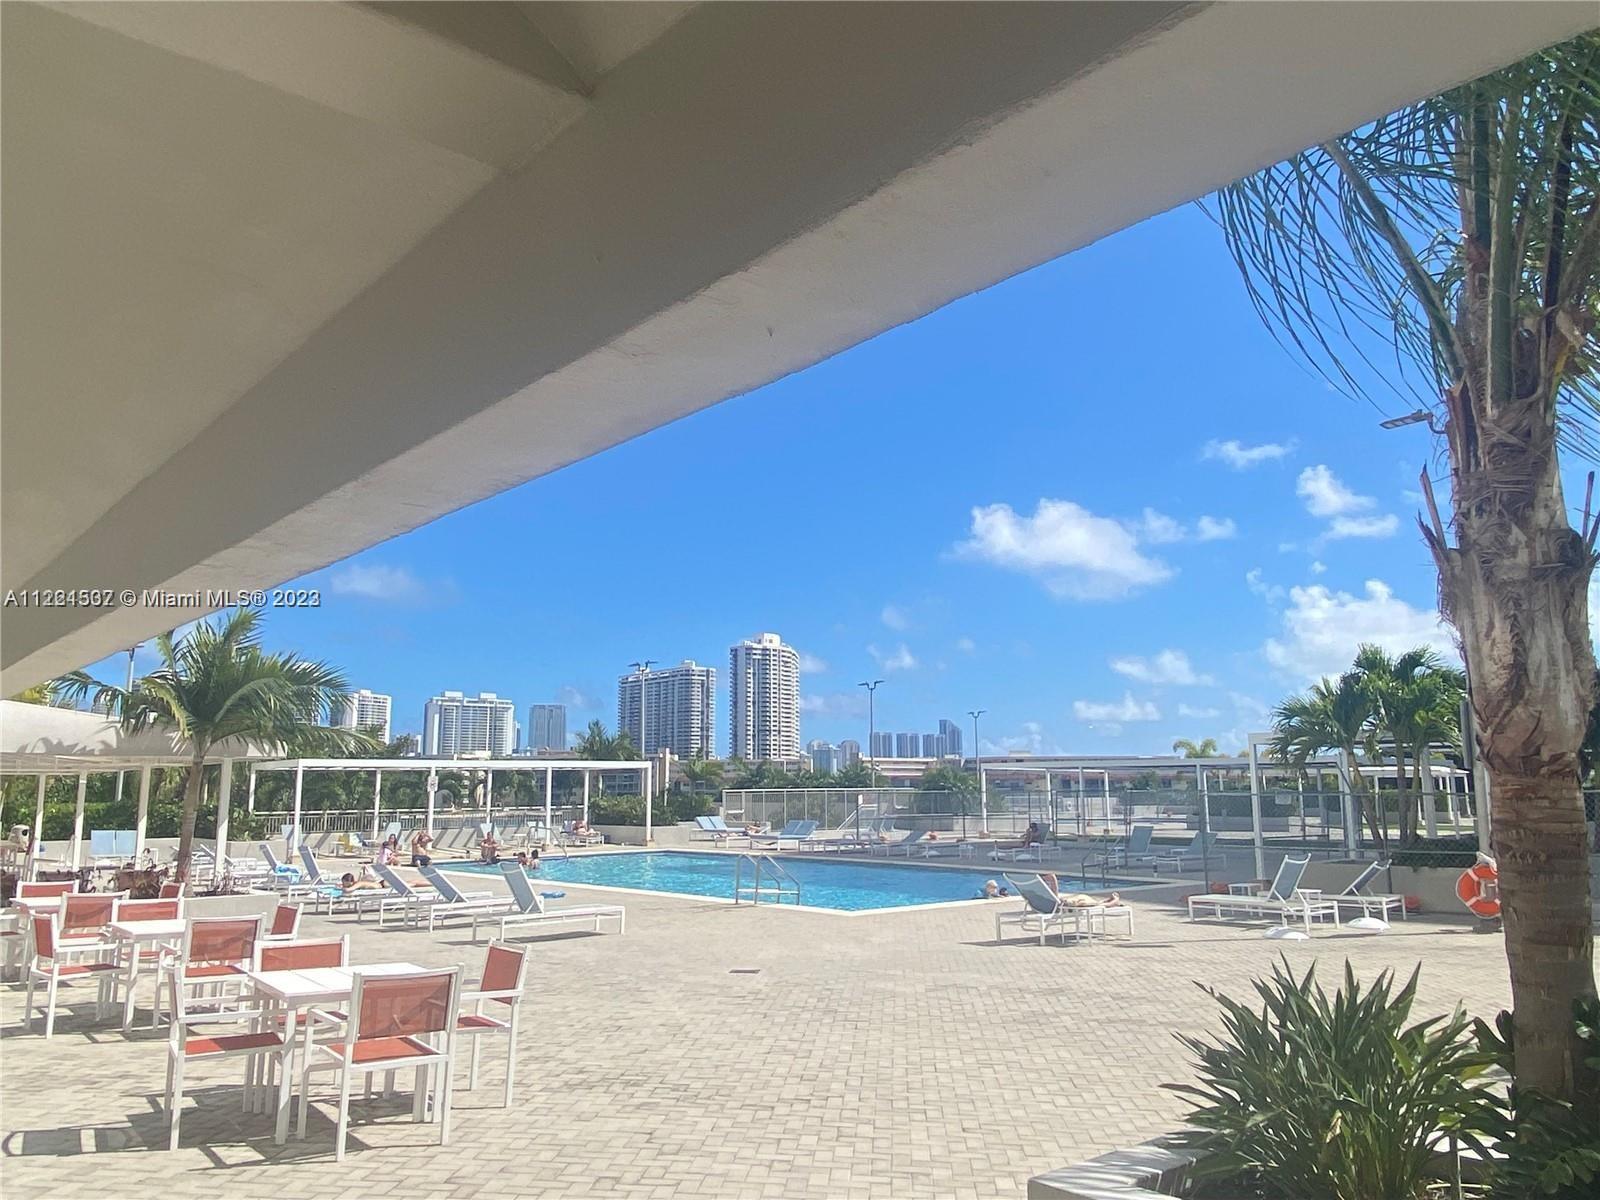 Great amenities and views! Building offers MARINA.